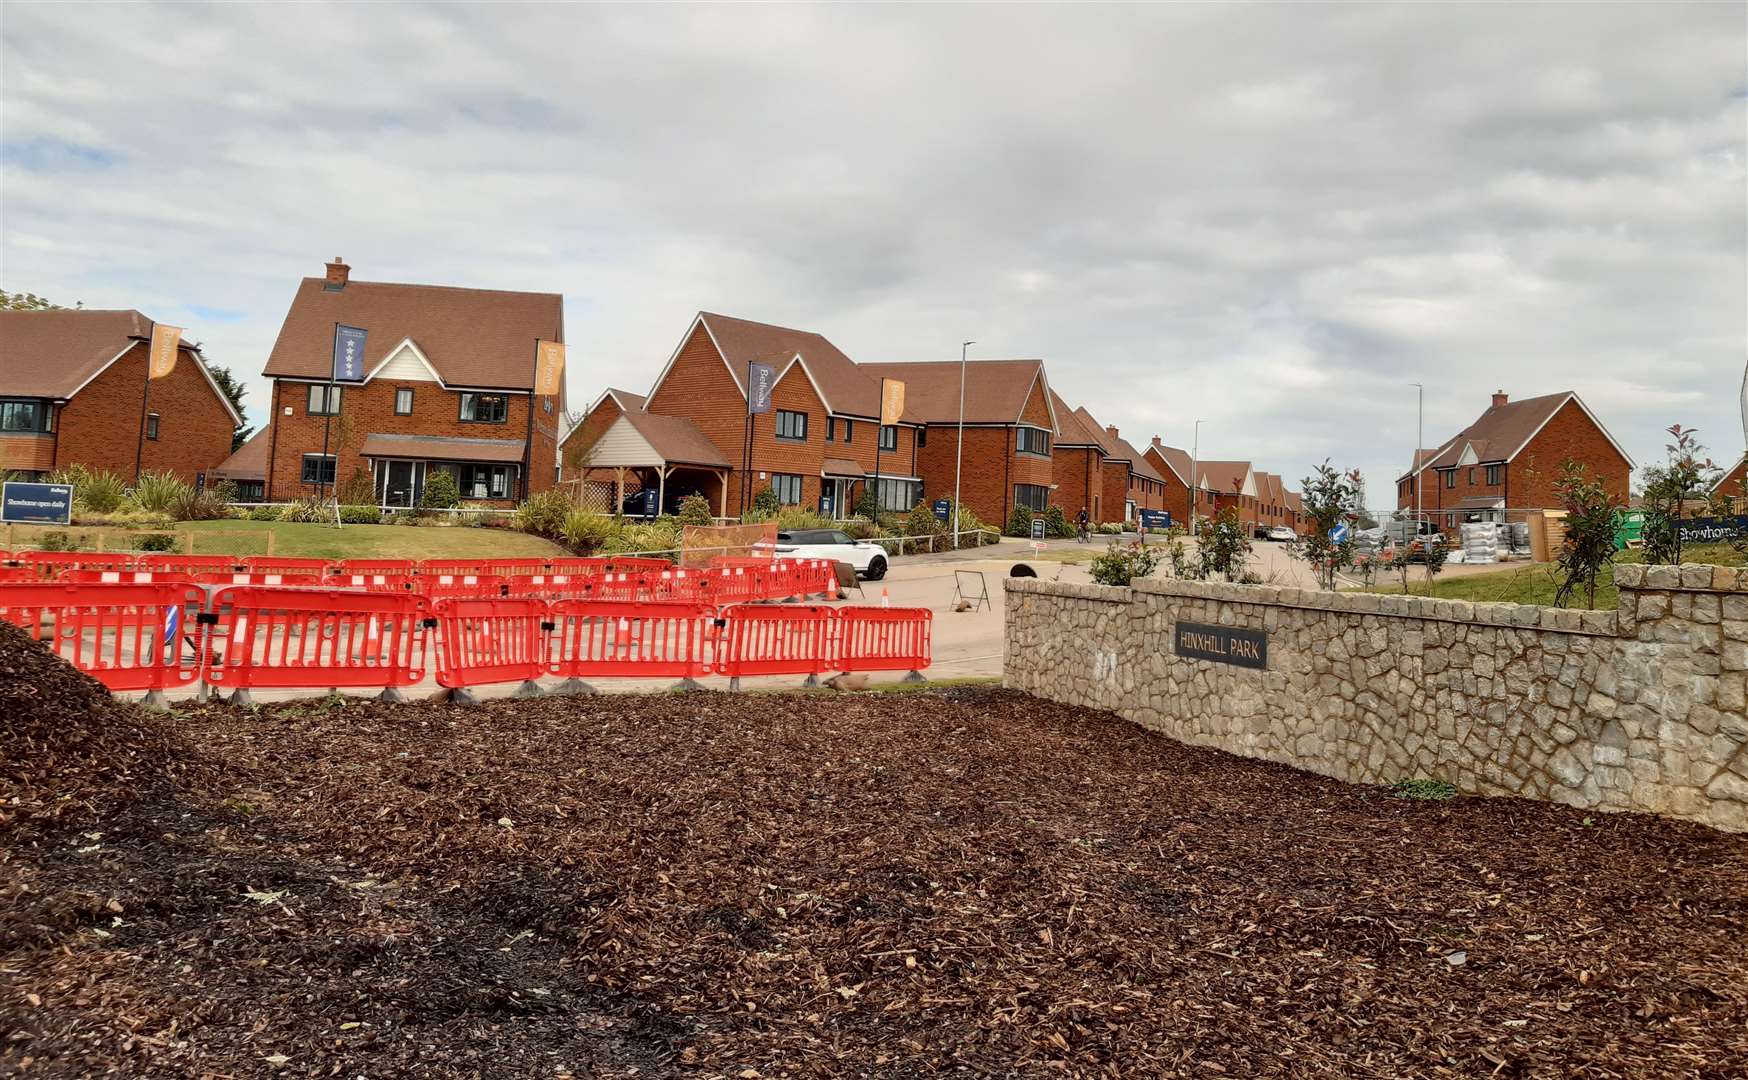 The Hinxhill Park estate is set to feature 192 homes